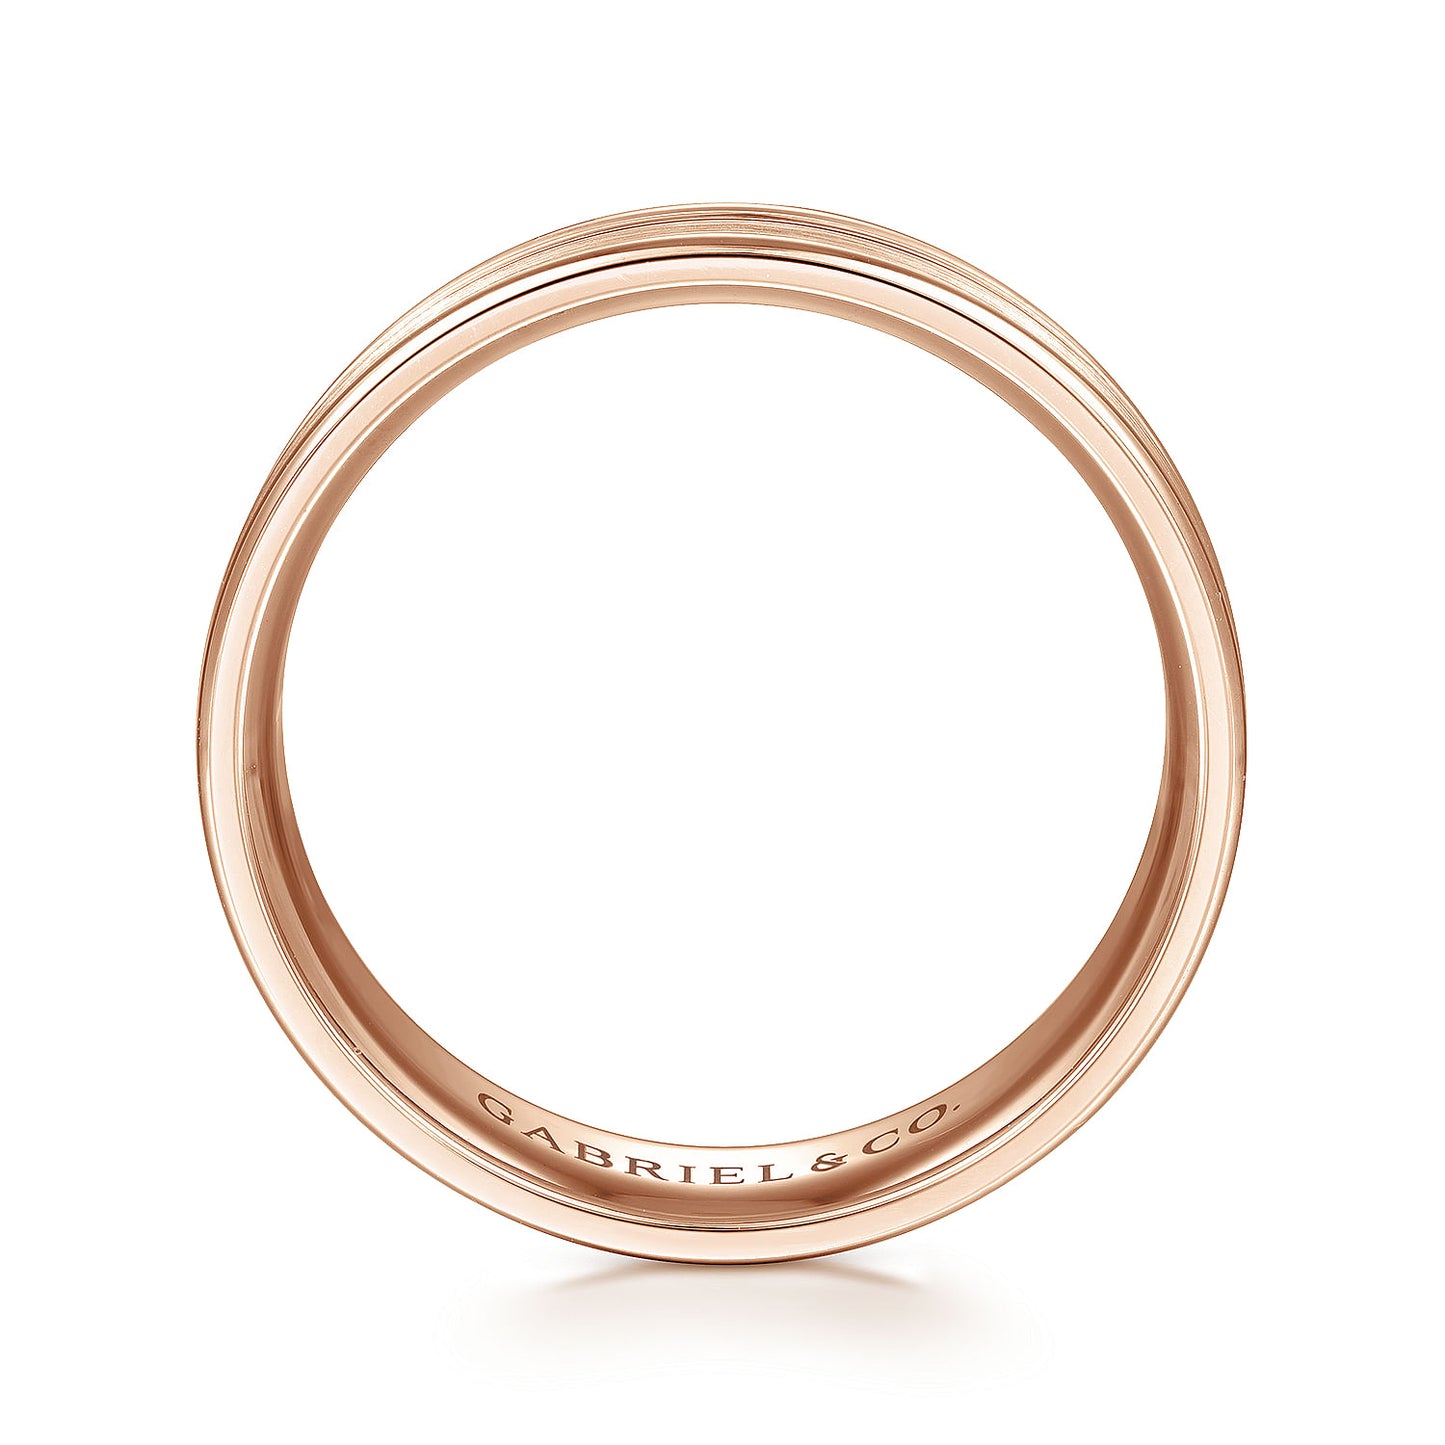 Gabriel & Co Rose Gold Wedding Band With A Satin Finished Center And Polished Edges - Gold Wedding Bands - Men's